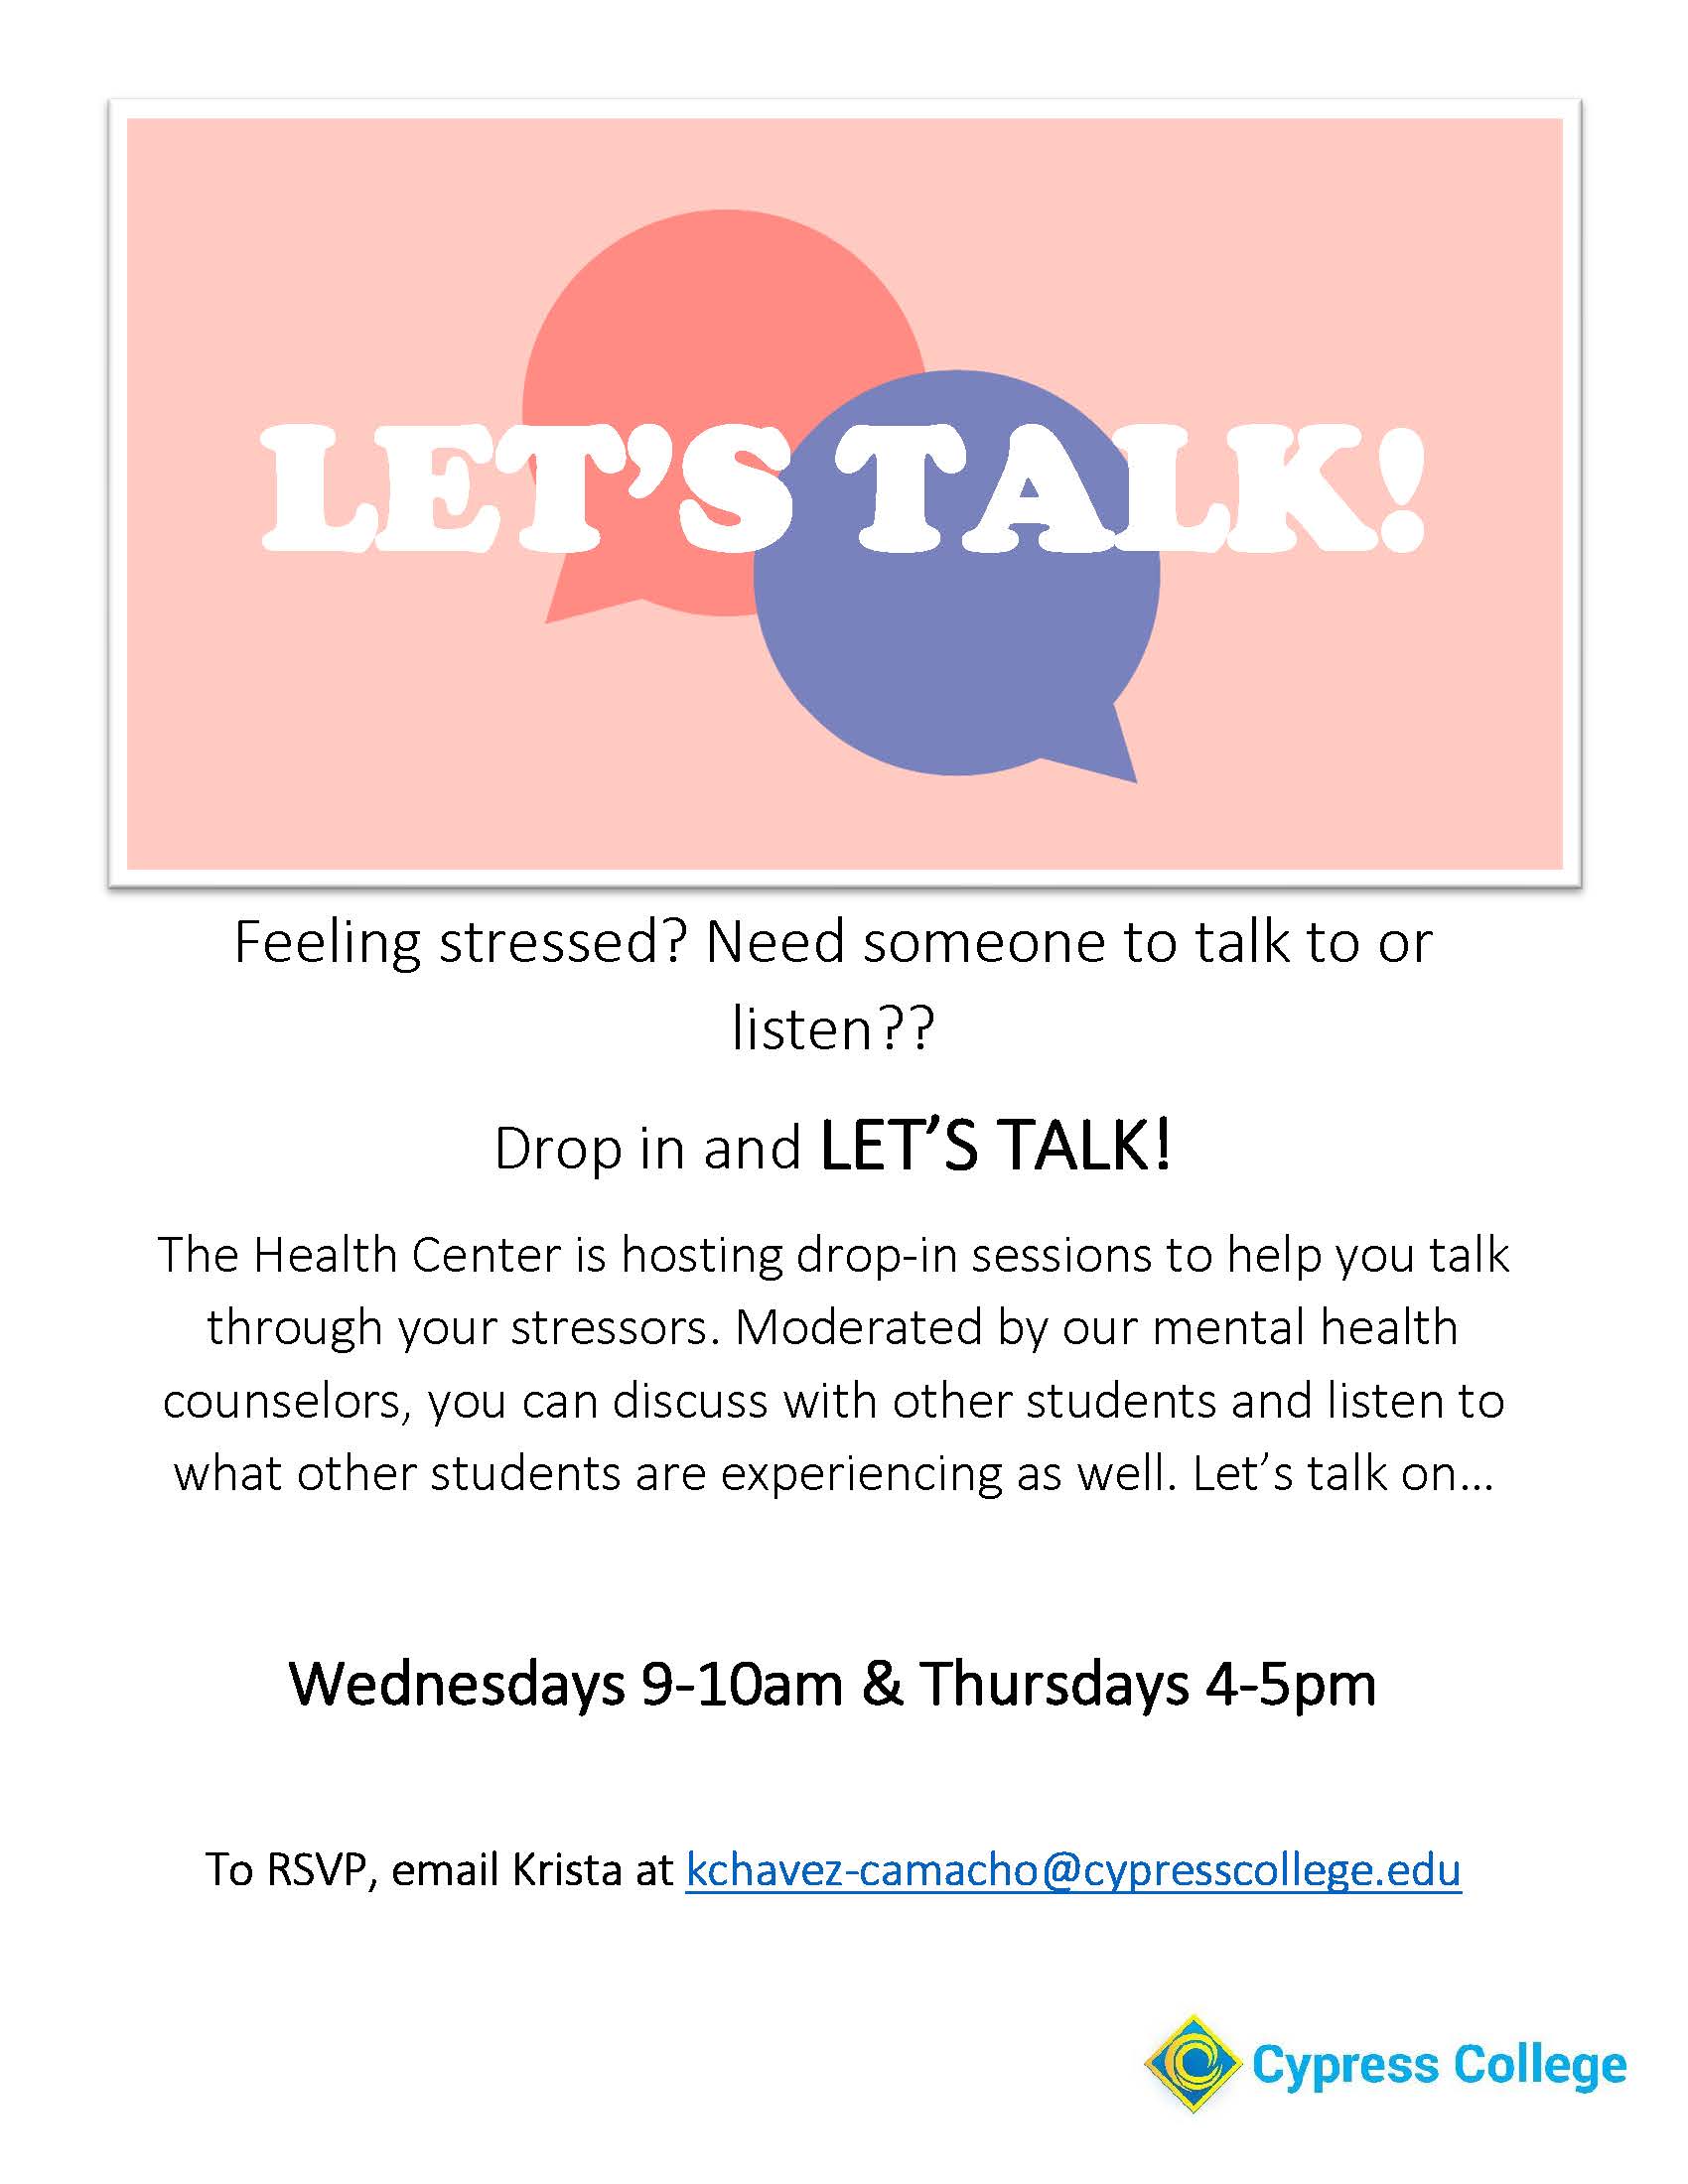 Flyer for Let's Talk, a weekly meeting where people can discuss their issues.